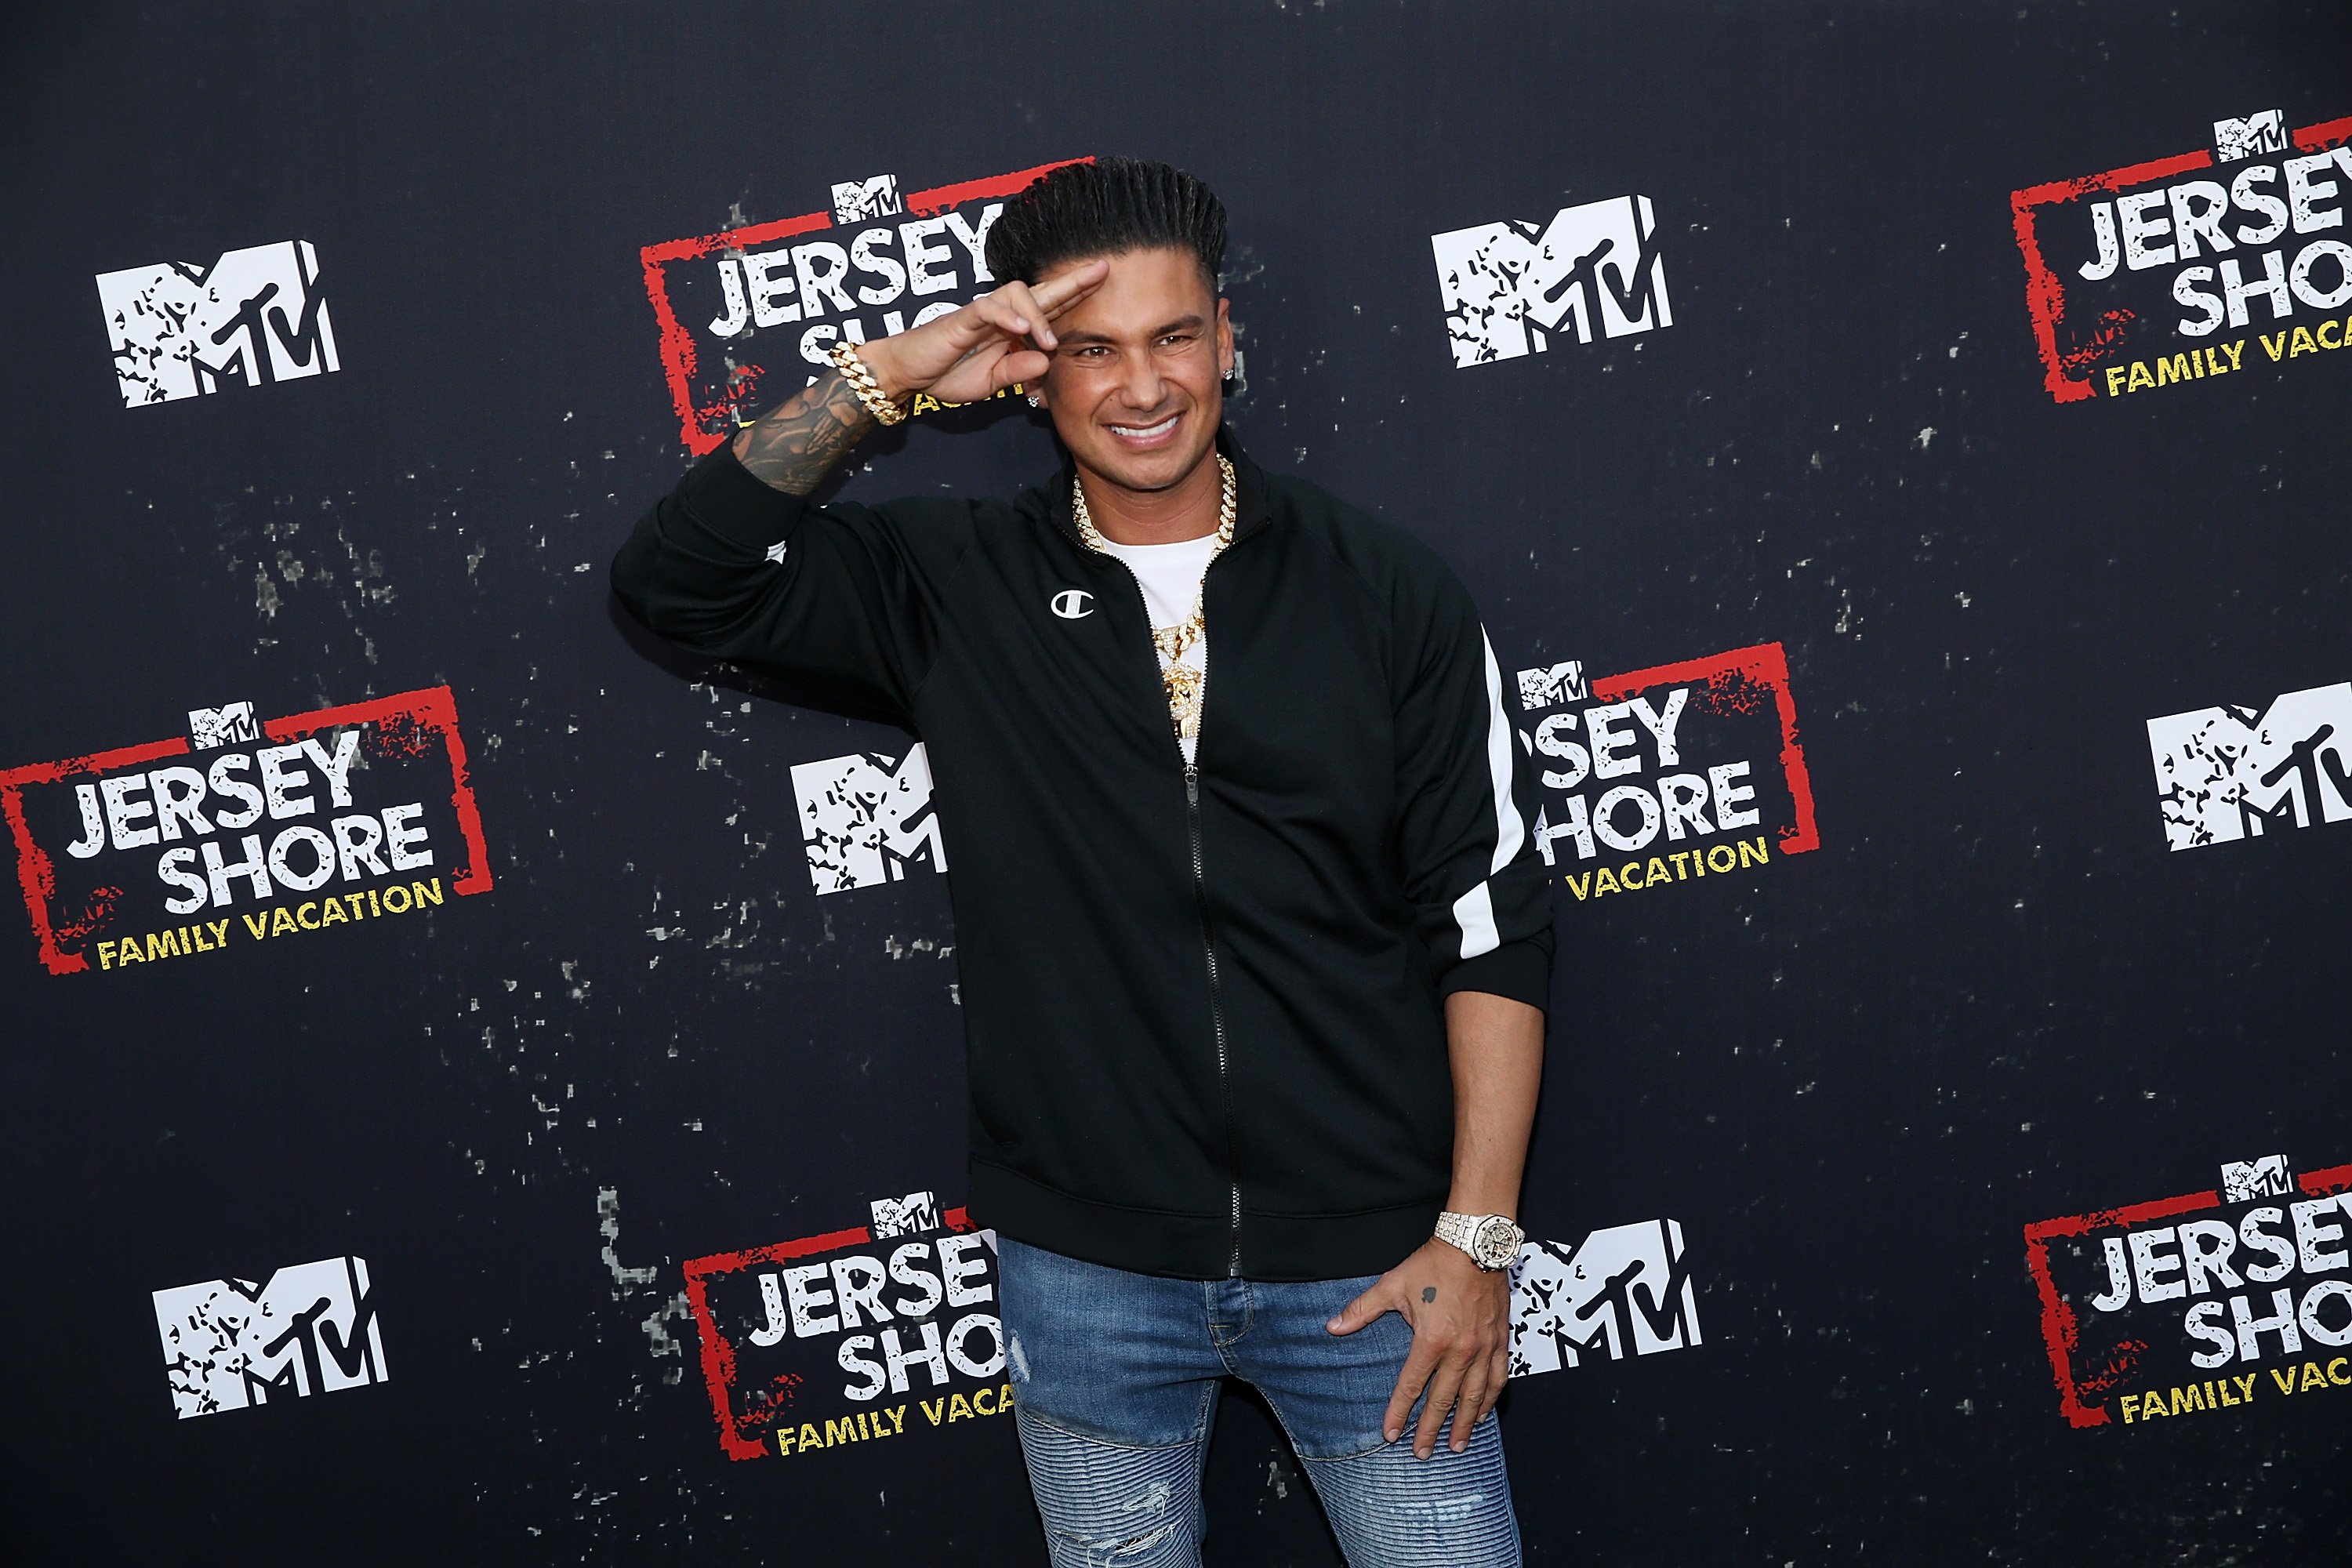 Pauly DelVecchio attends the "Jersey Shore Family Vacation" Global Premiere at HYDE Sunset in 2018